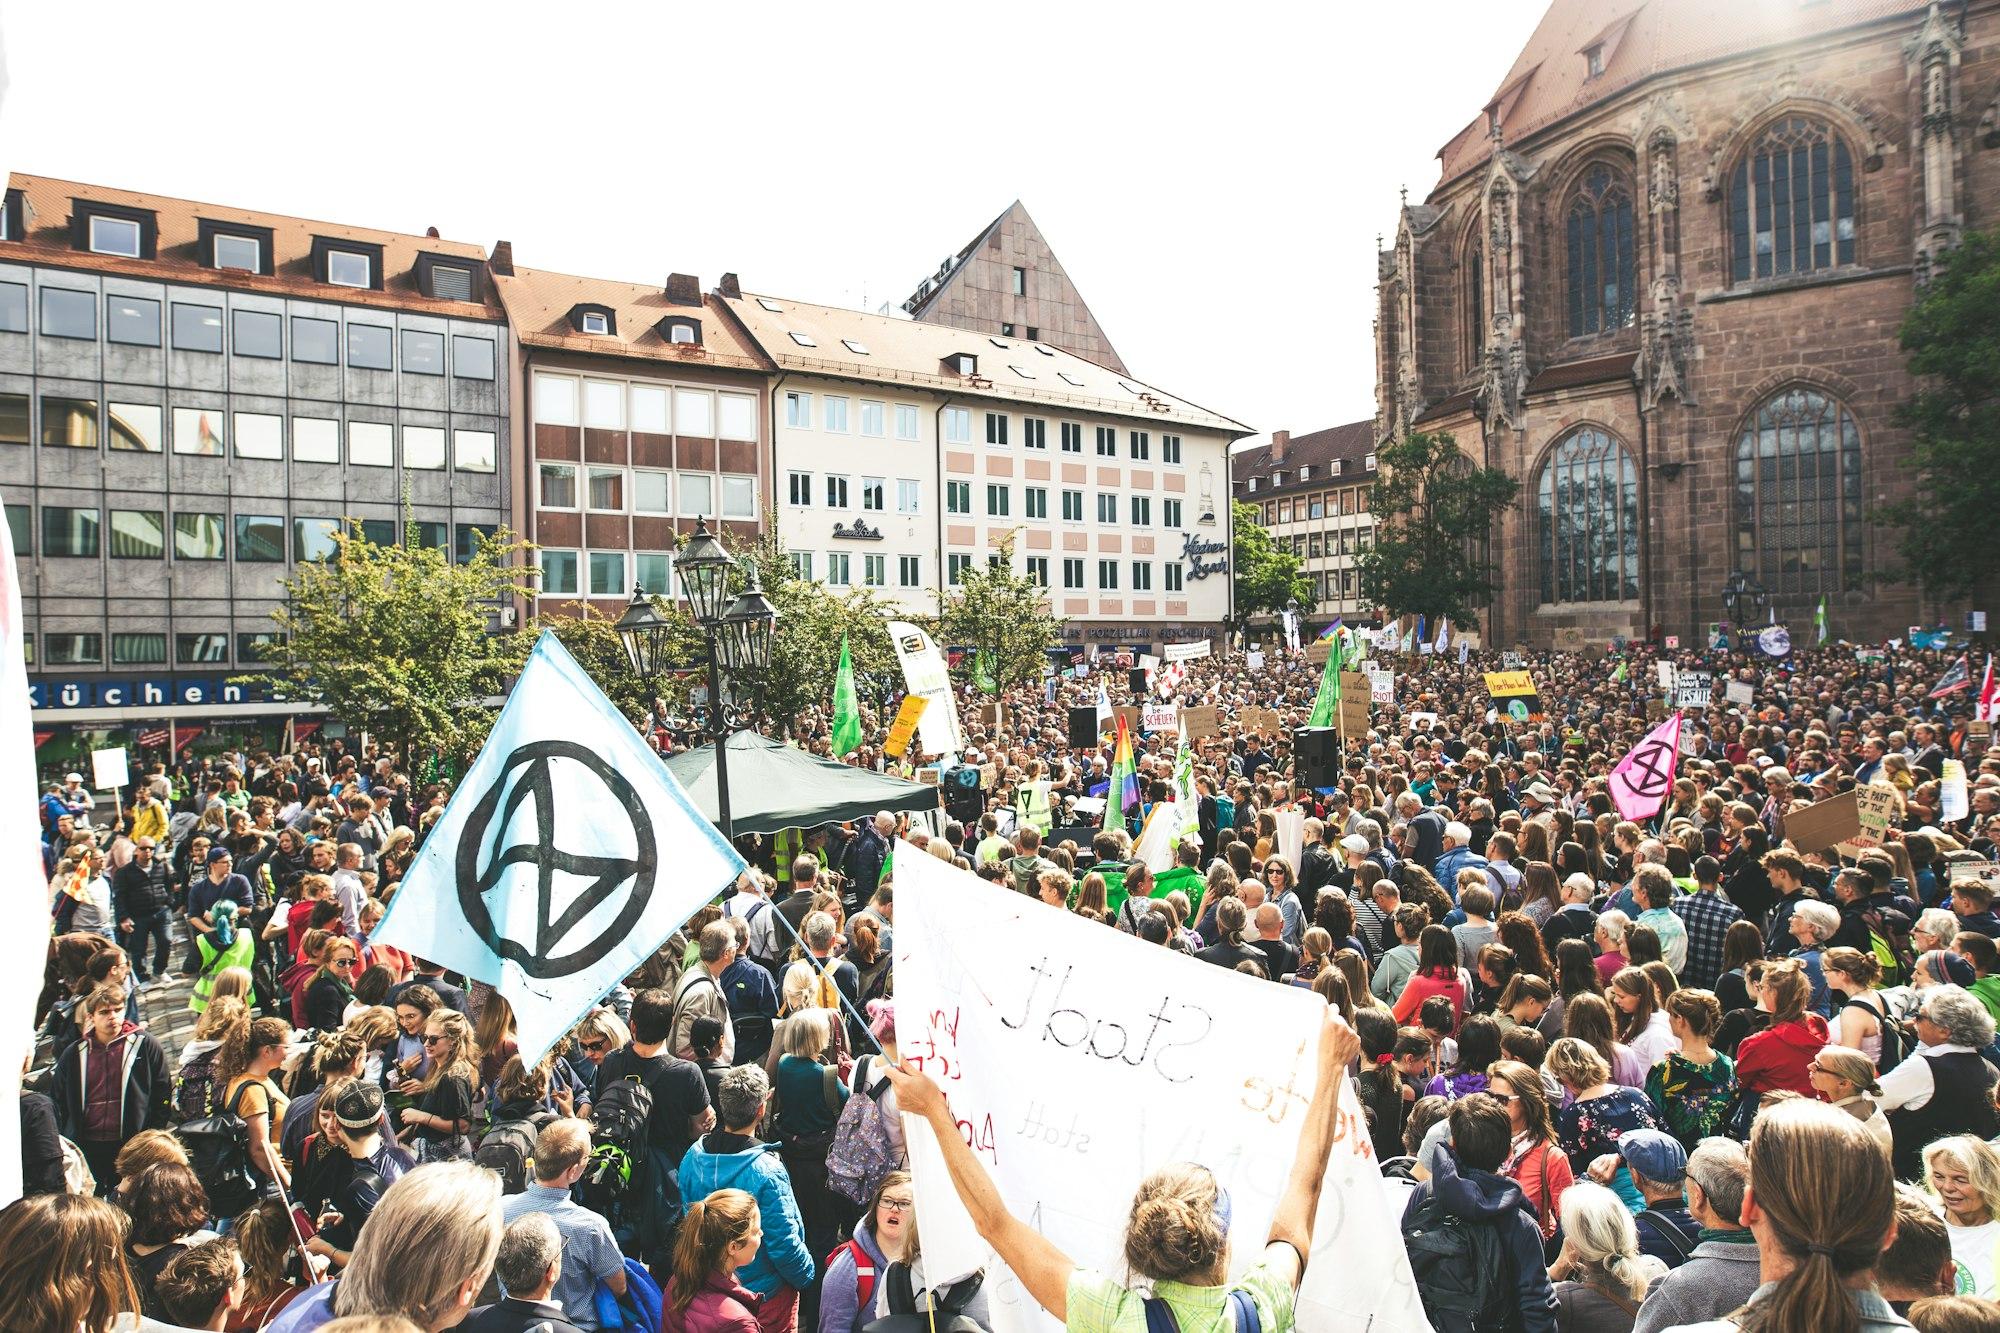 Radical activism to defend the planet